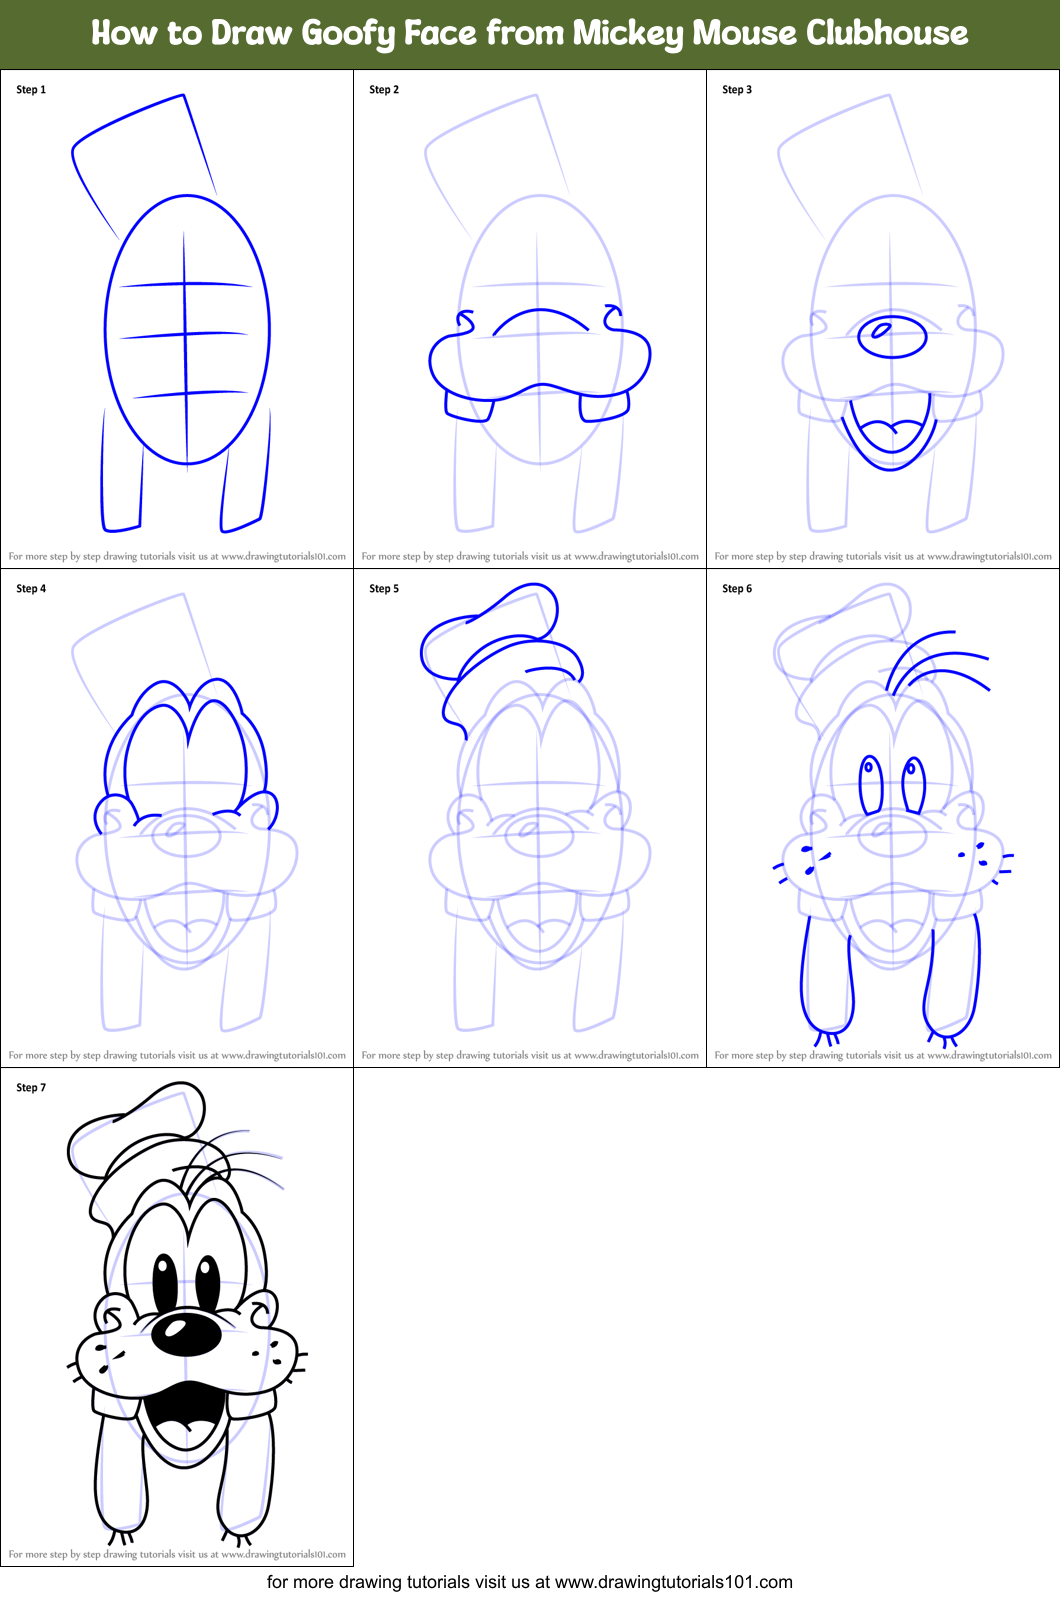 How to Draw Goofy Face from Mickey Mouse Clubhouse printable step by